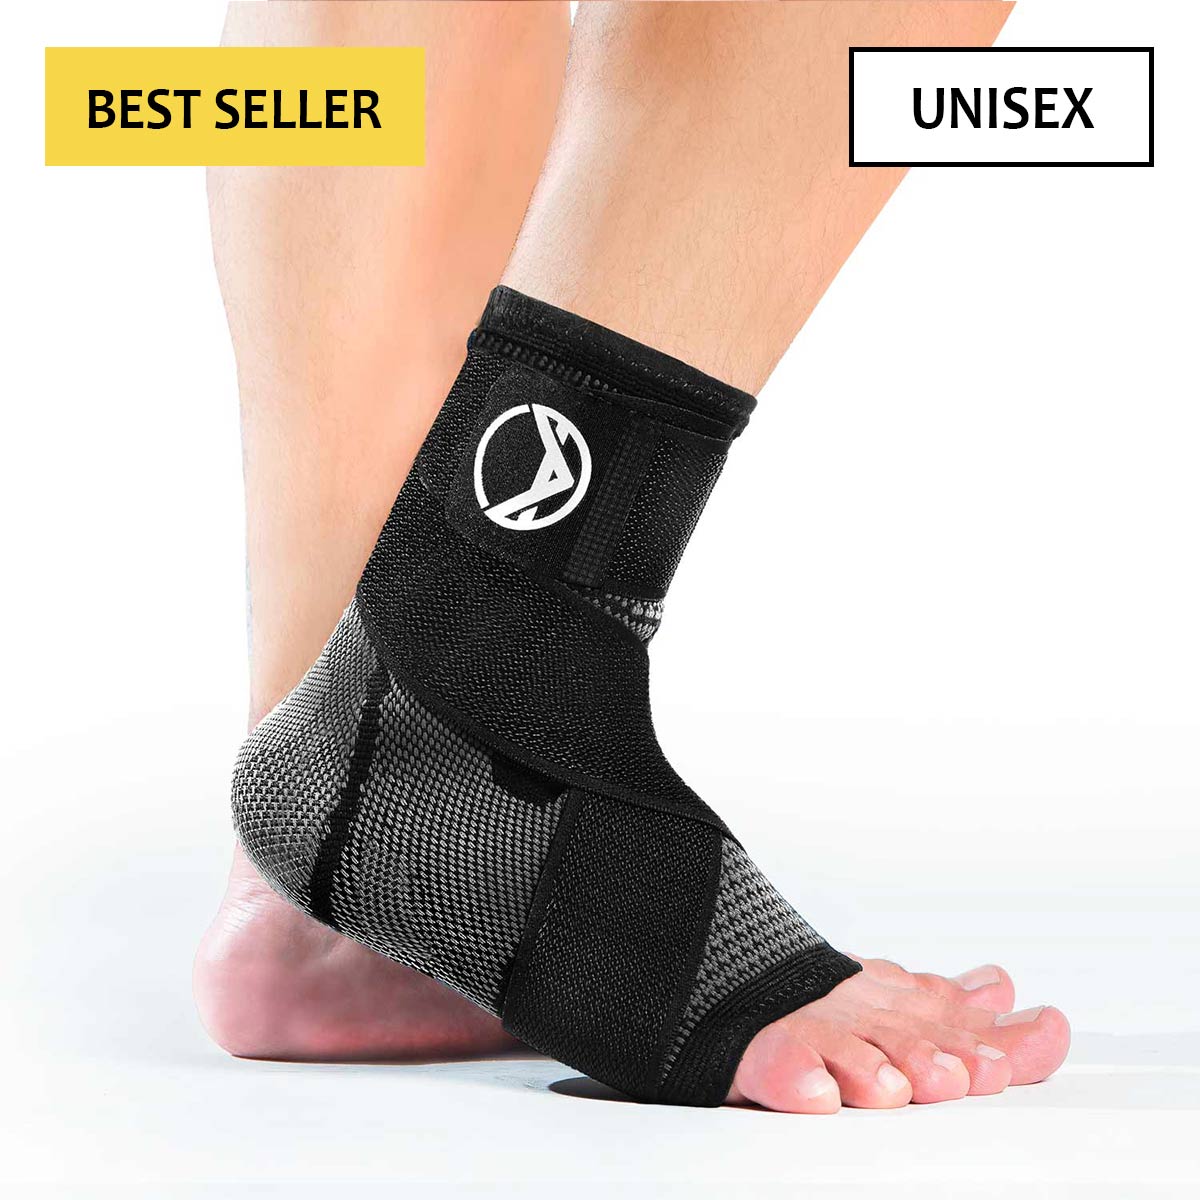 Buy Copper Joe Compression Recovery Arch Support - 2 Plantar Fasciitis  Braces/Sleeves - S/M , Plantar Fasciitis Socks , Arch Support Sleeves , Leg  Compression Sleeves at ShopLC.